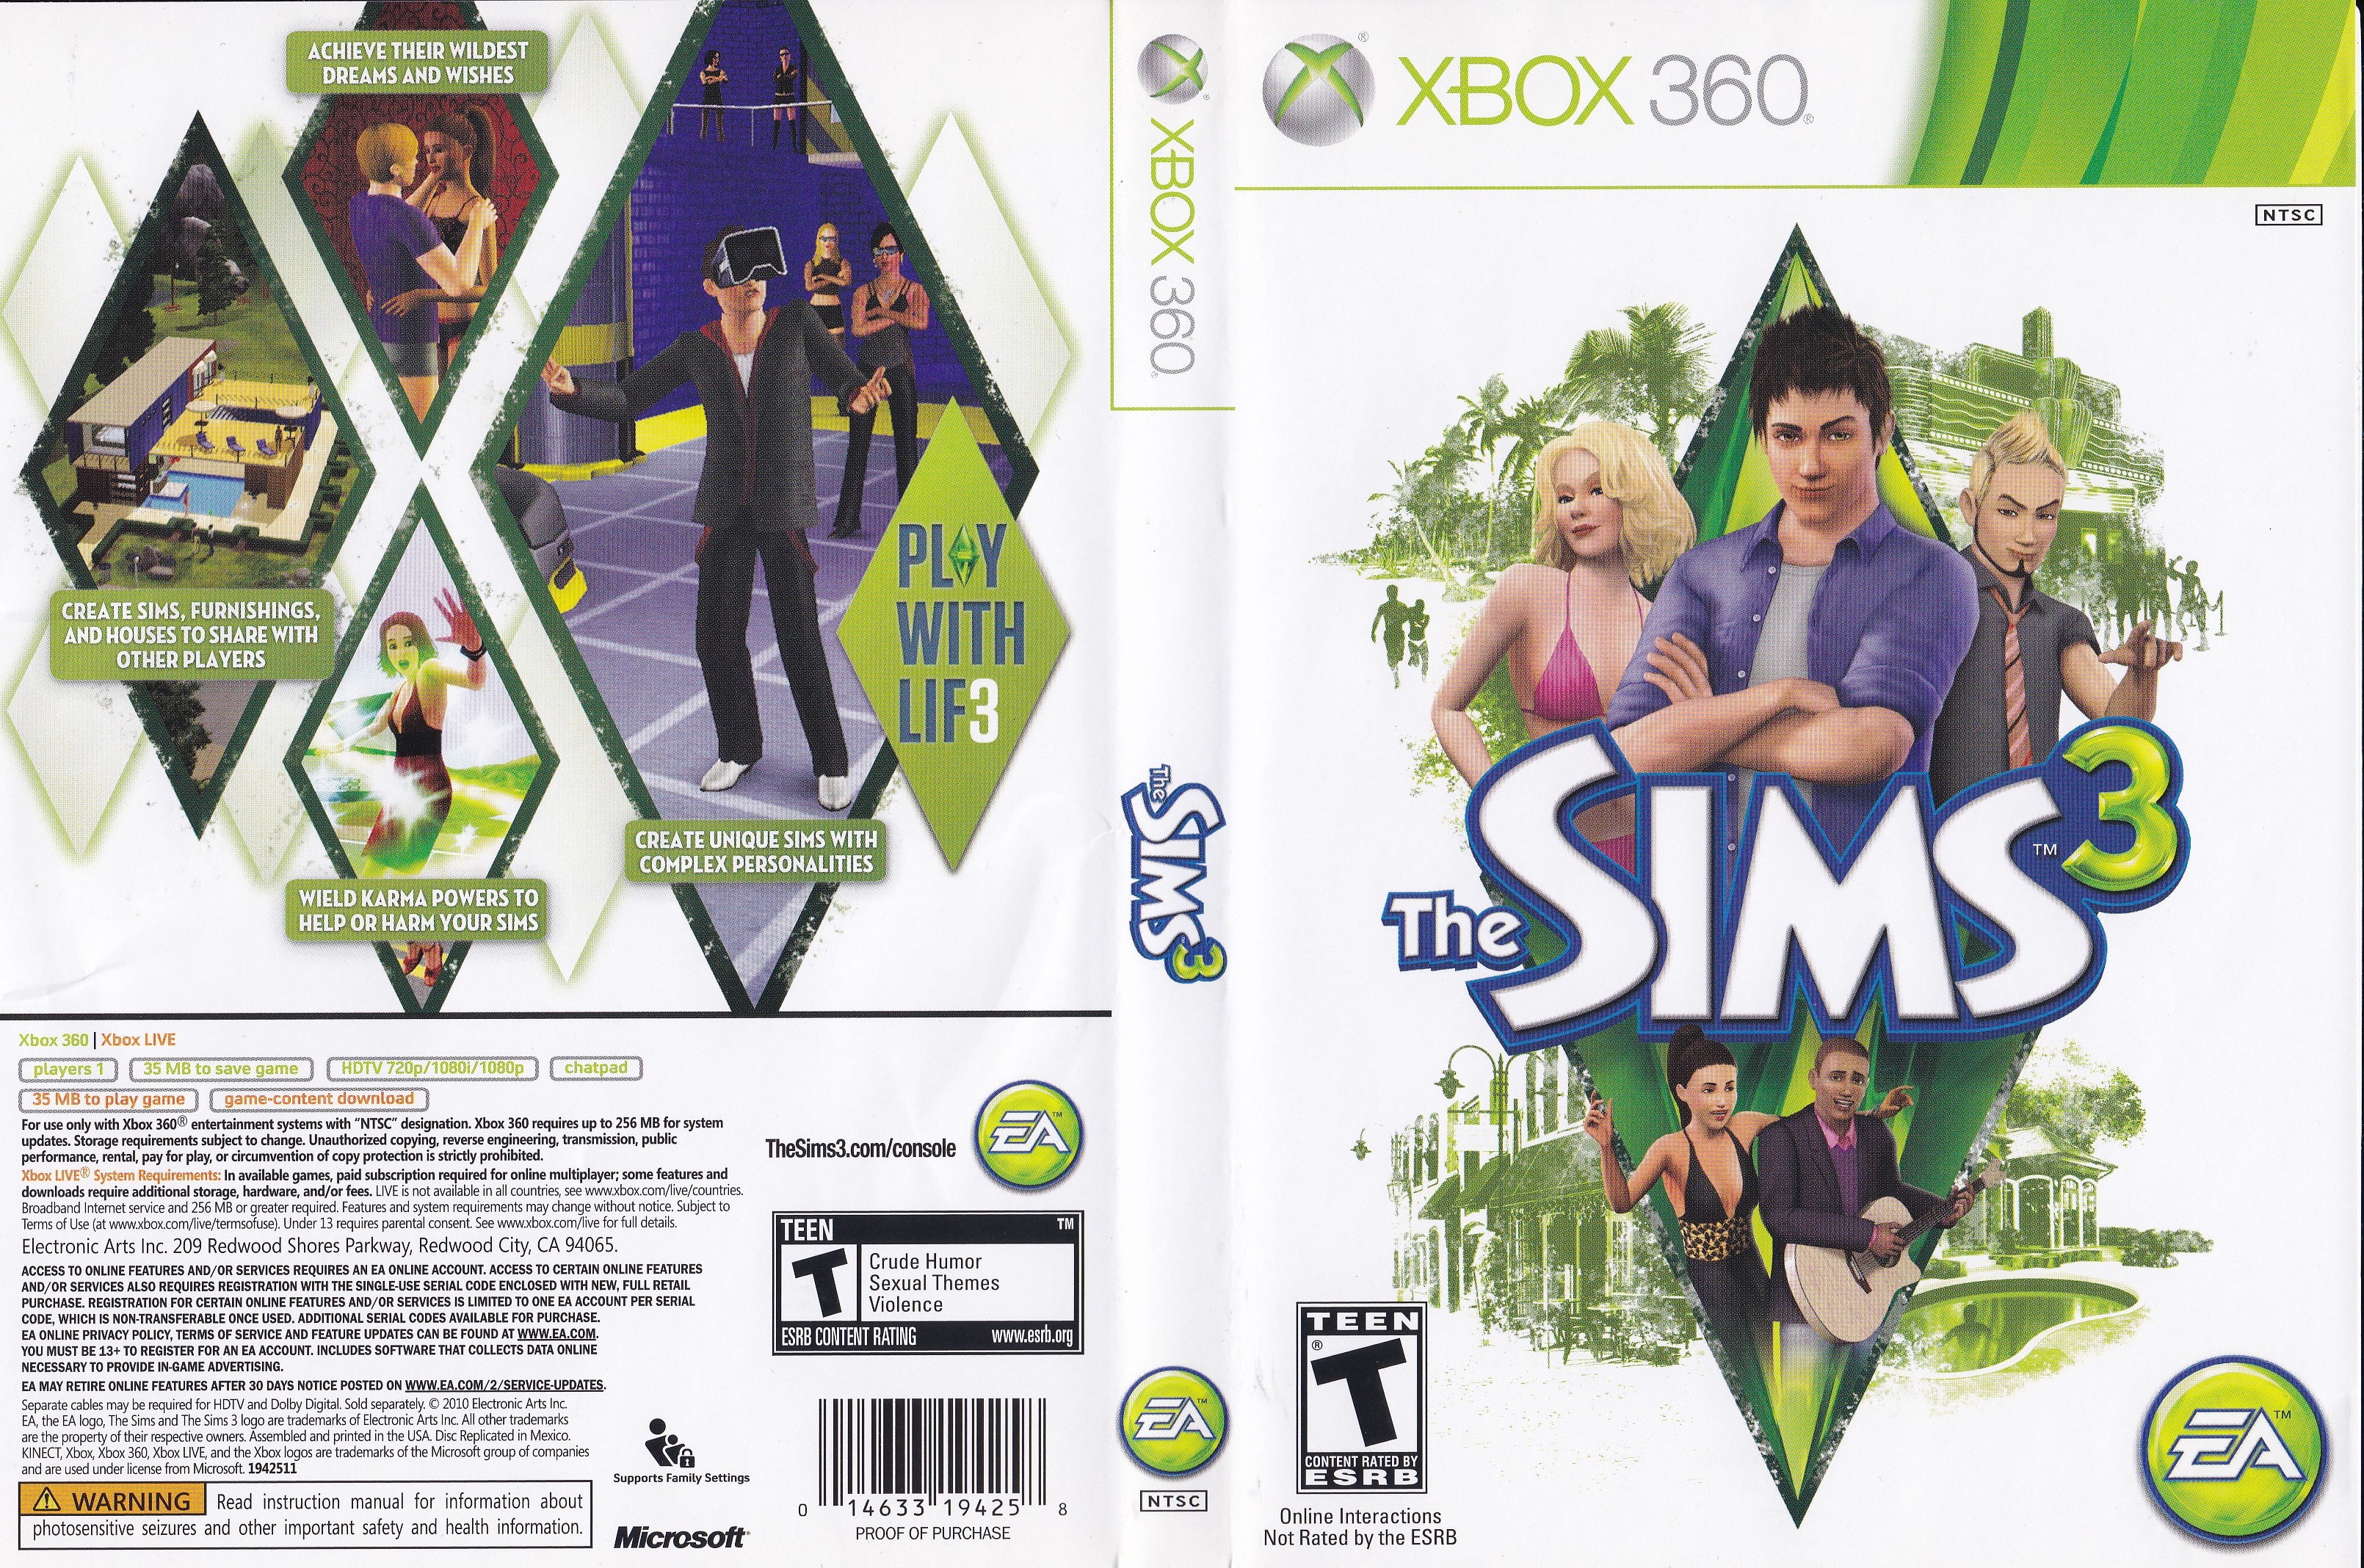  The Sims 3 for Xbox 360 : Video Games